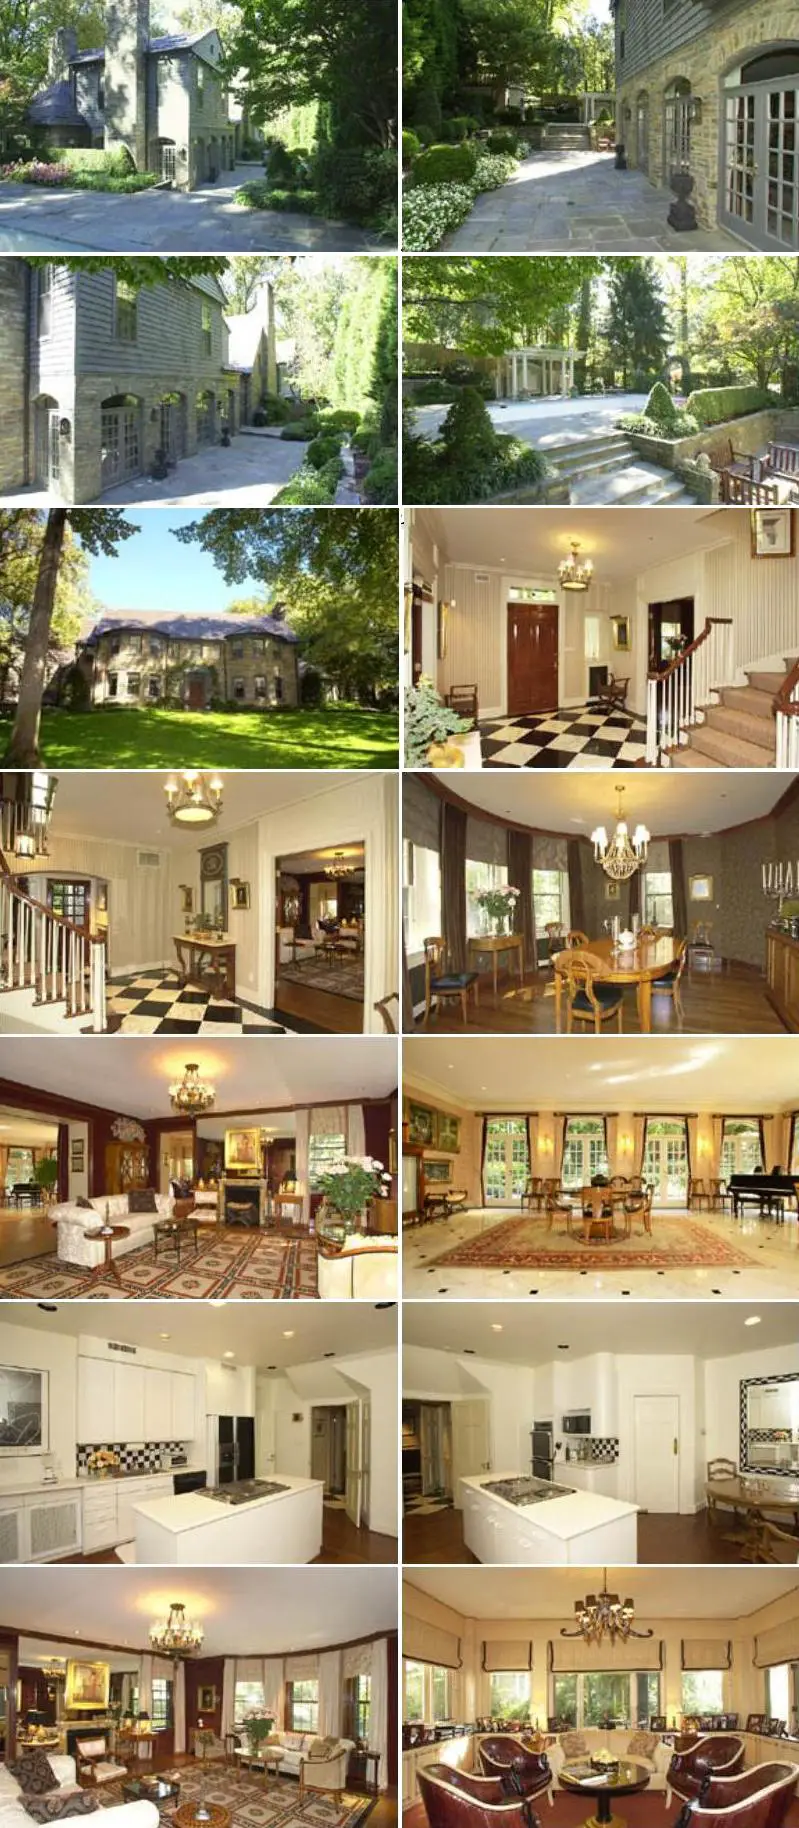 Tim Russert home profile - Tim Russert's house in Washington DC - pictures